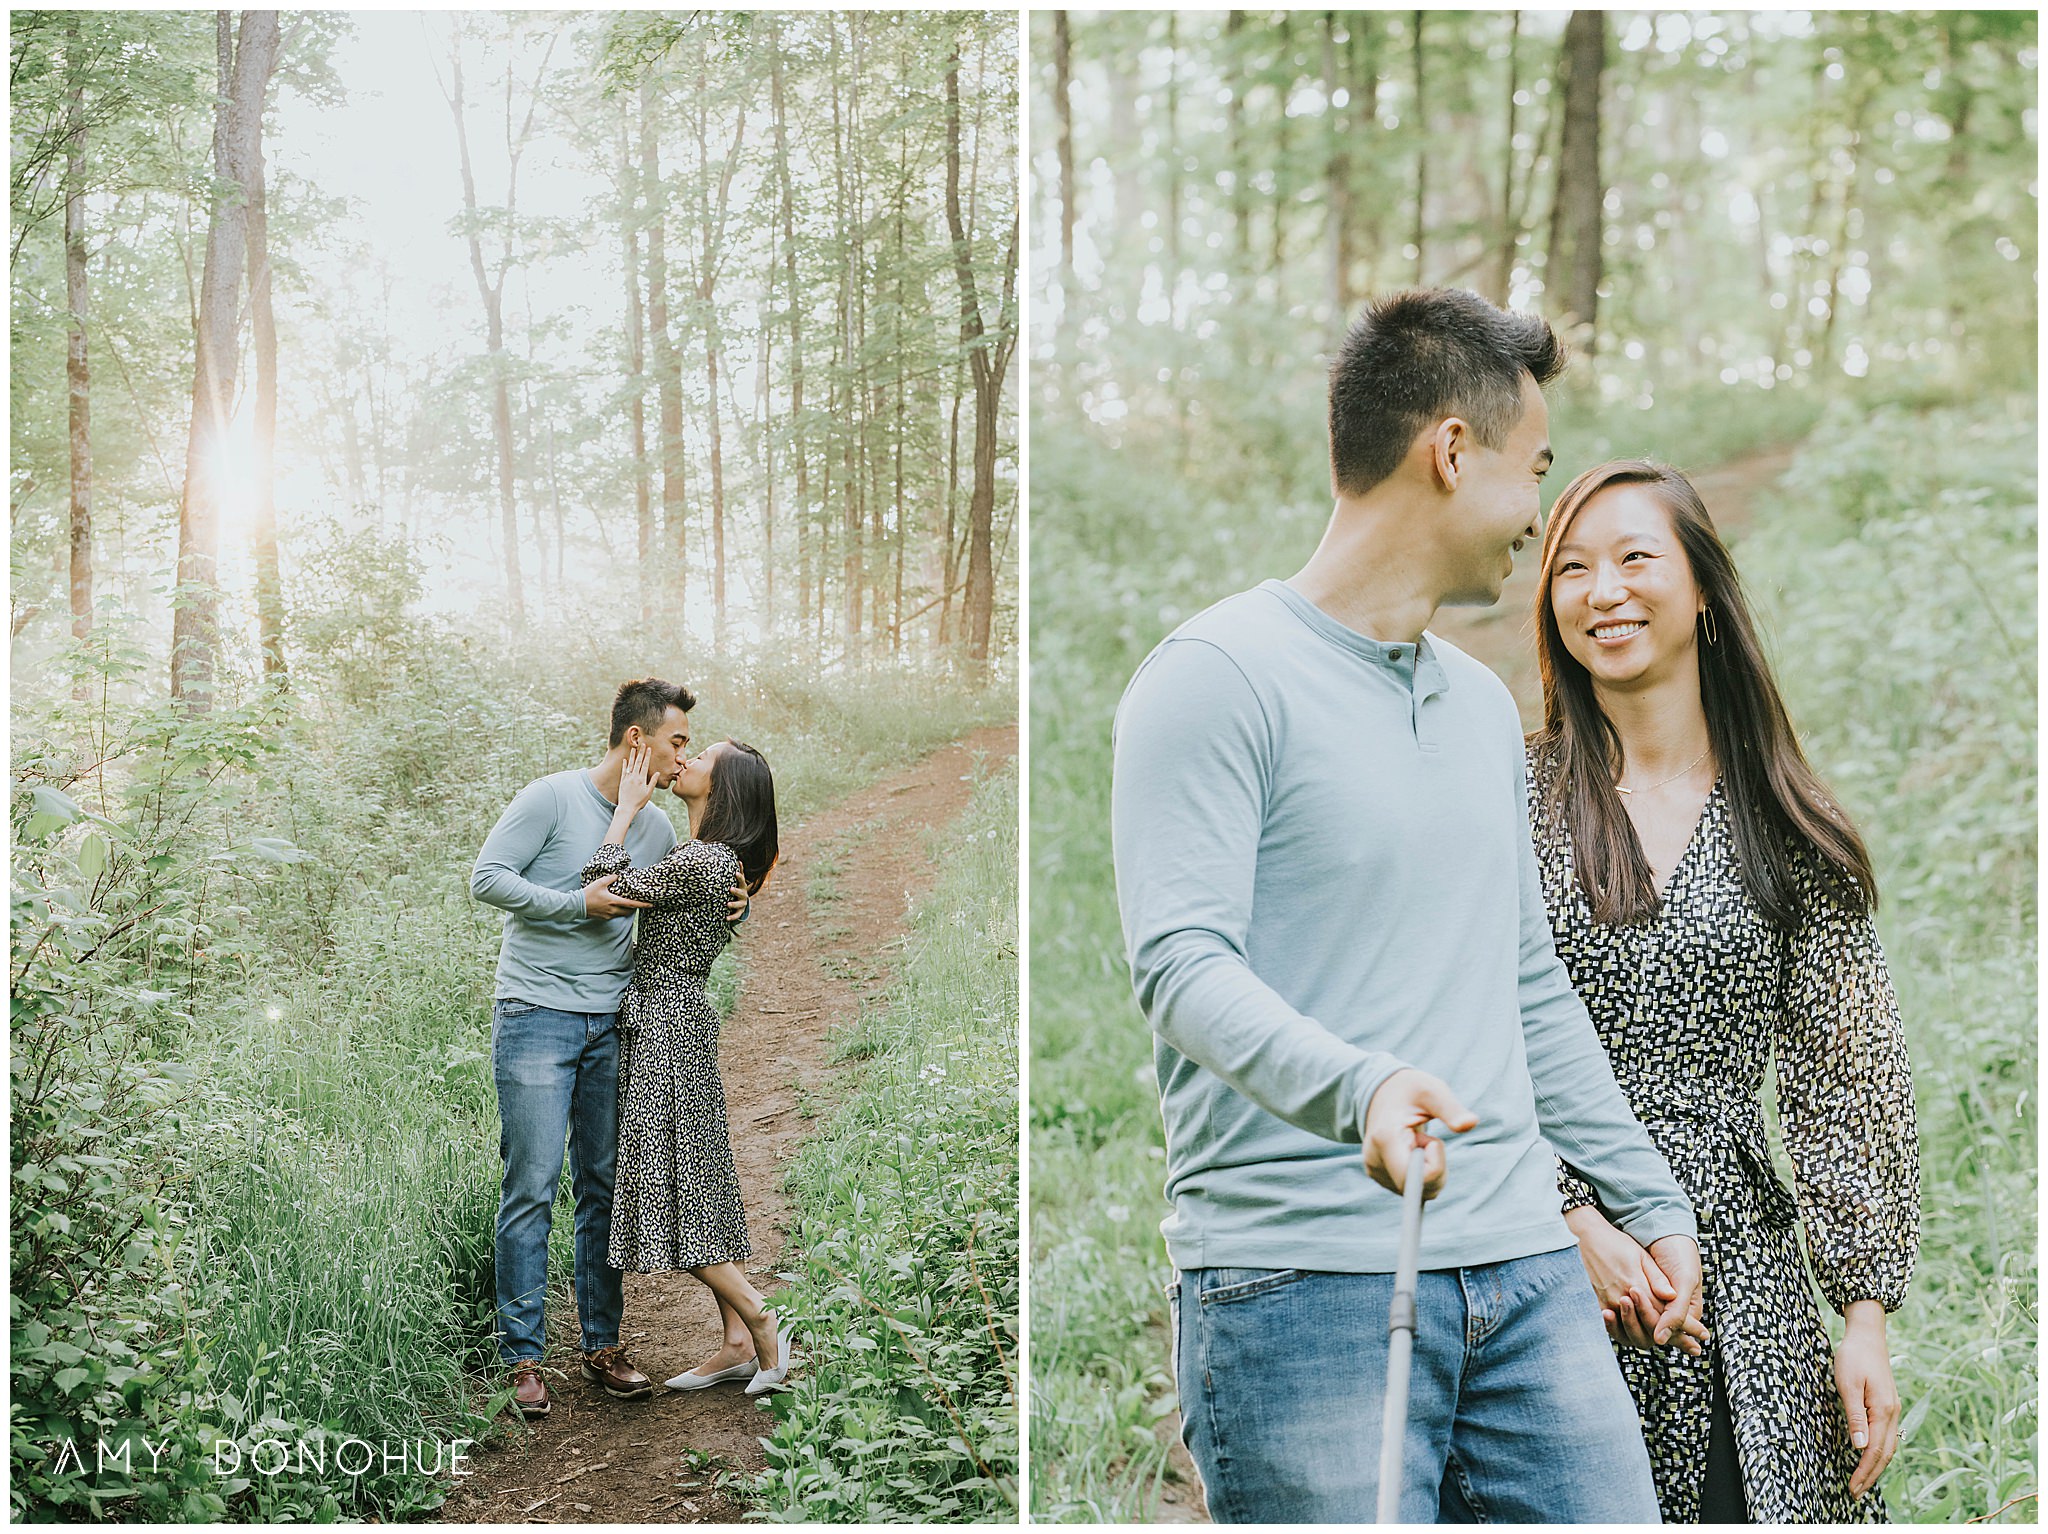 Mount Peg Engagement Session in Woodstock Vermont
